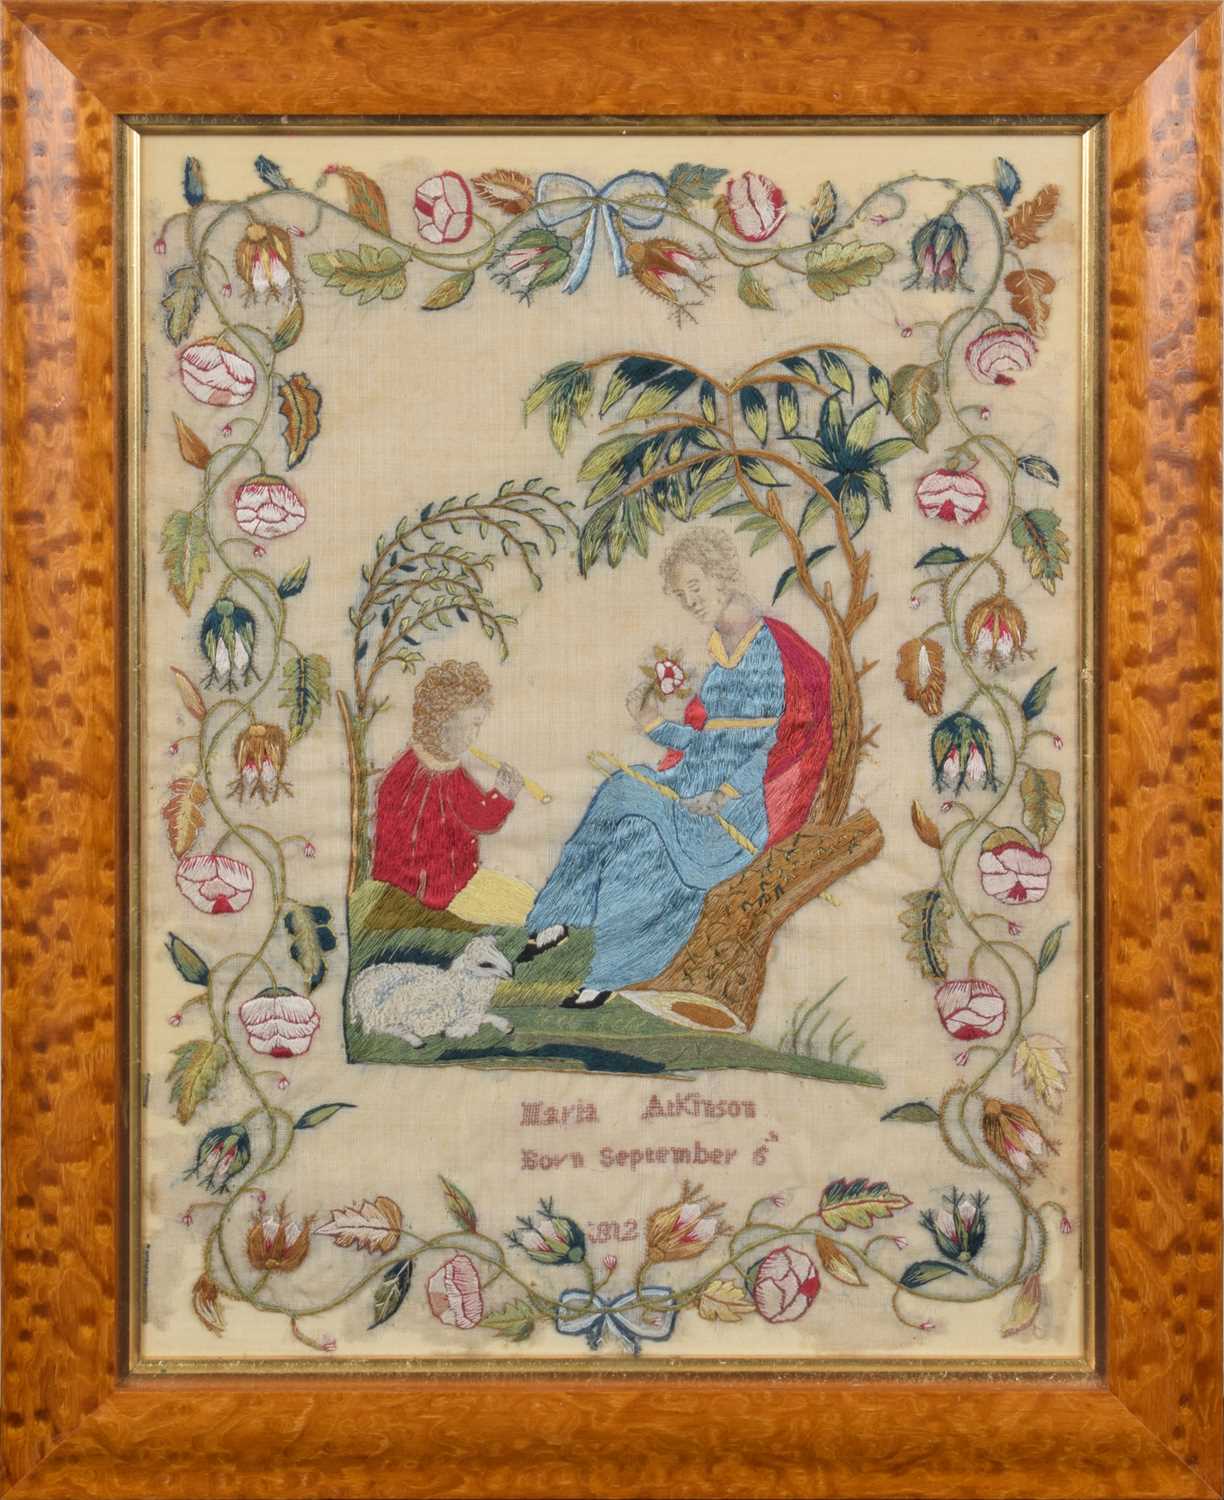 Lot 226 - Needlework Picture of a Mother and Child, 1812